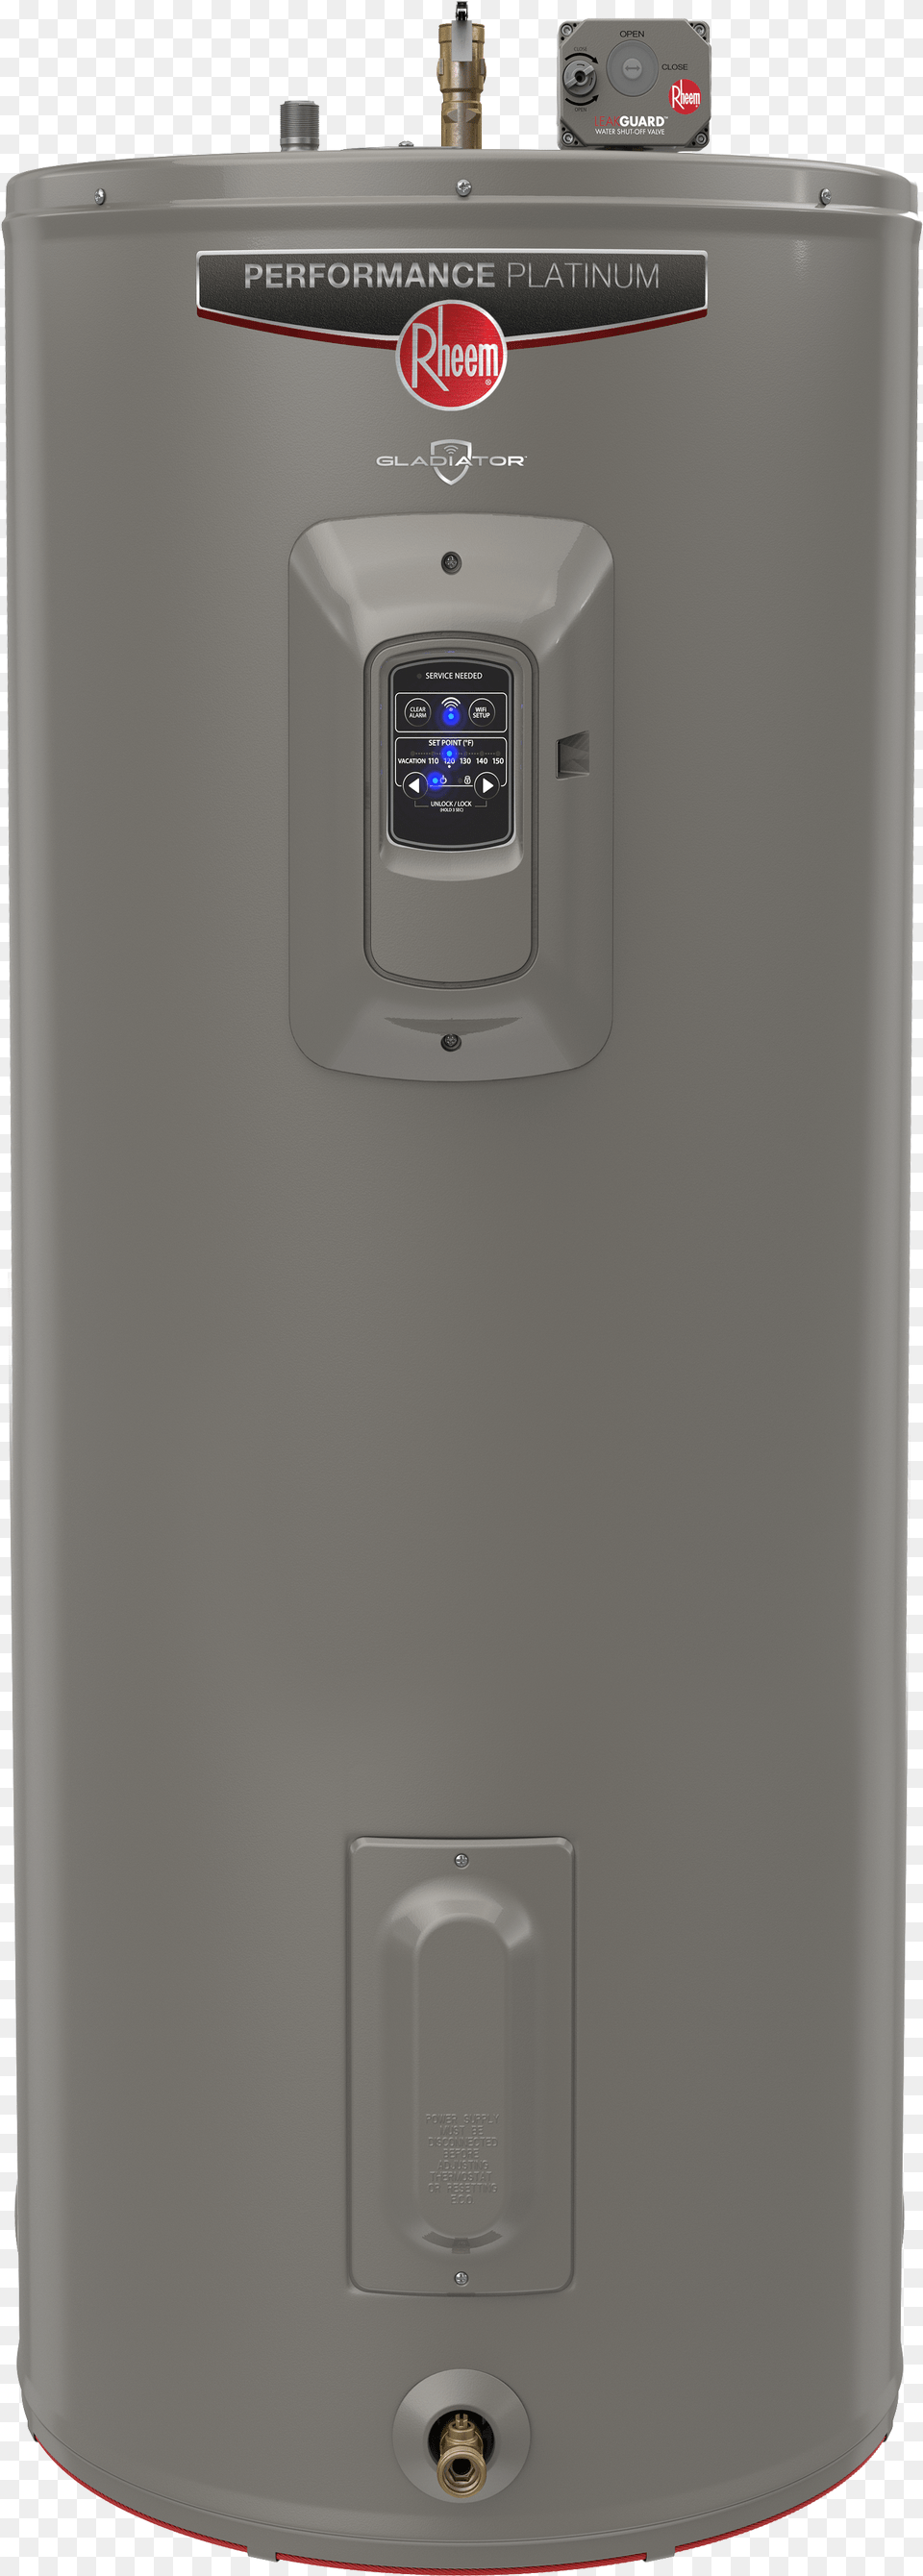 Electric Water Heaters Rheem Gladiator Water Heater Free Transparent Png